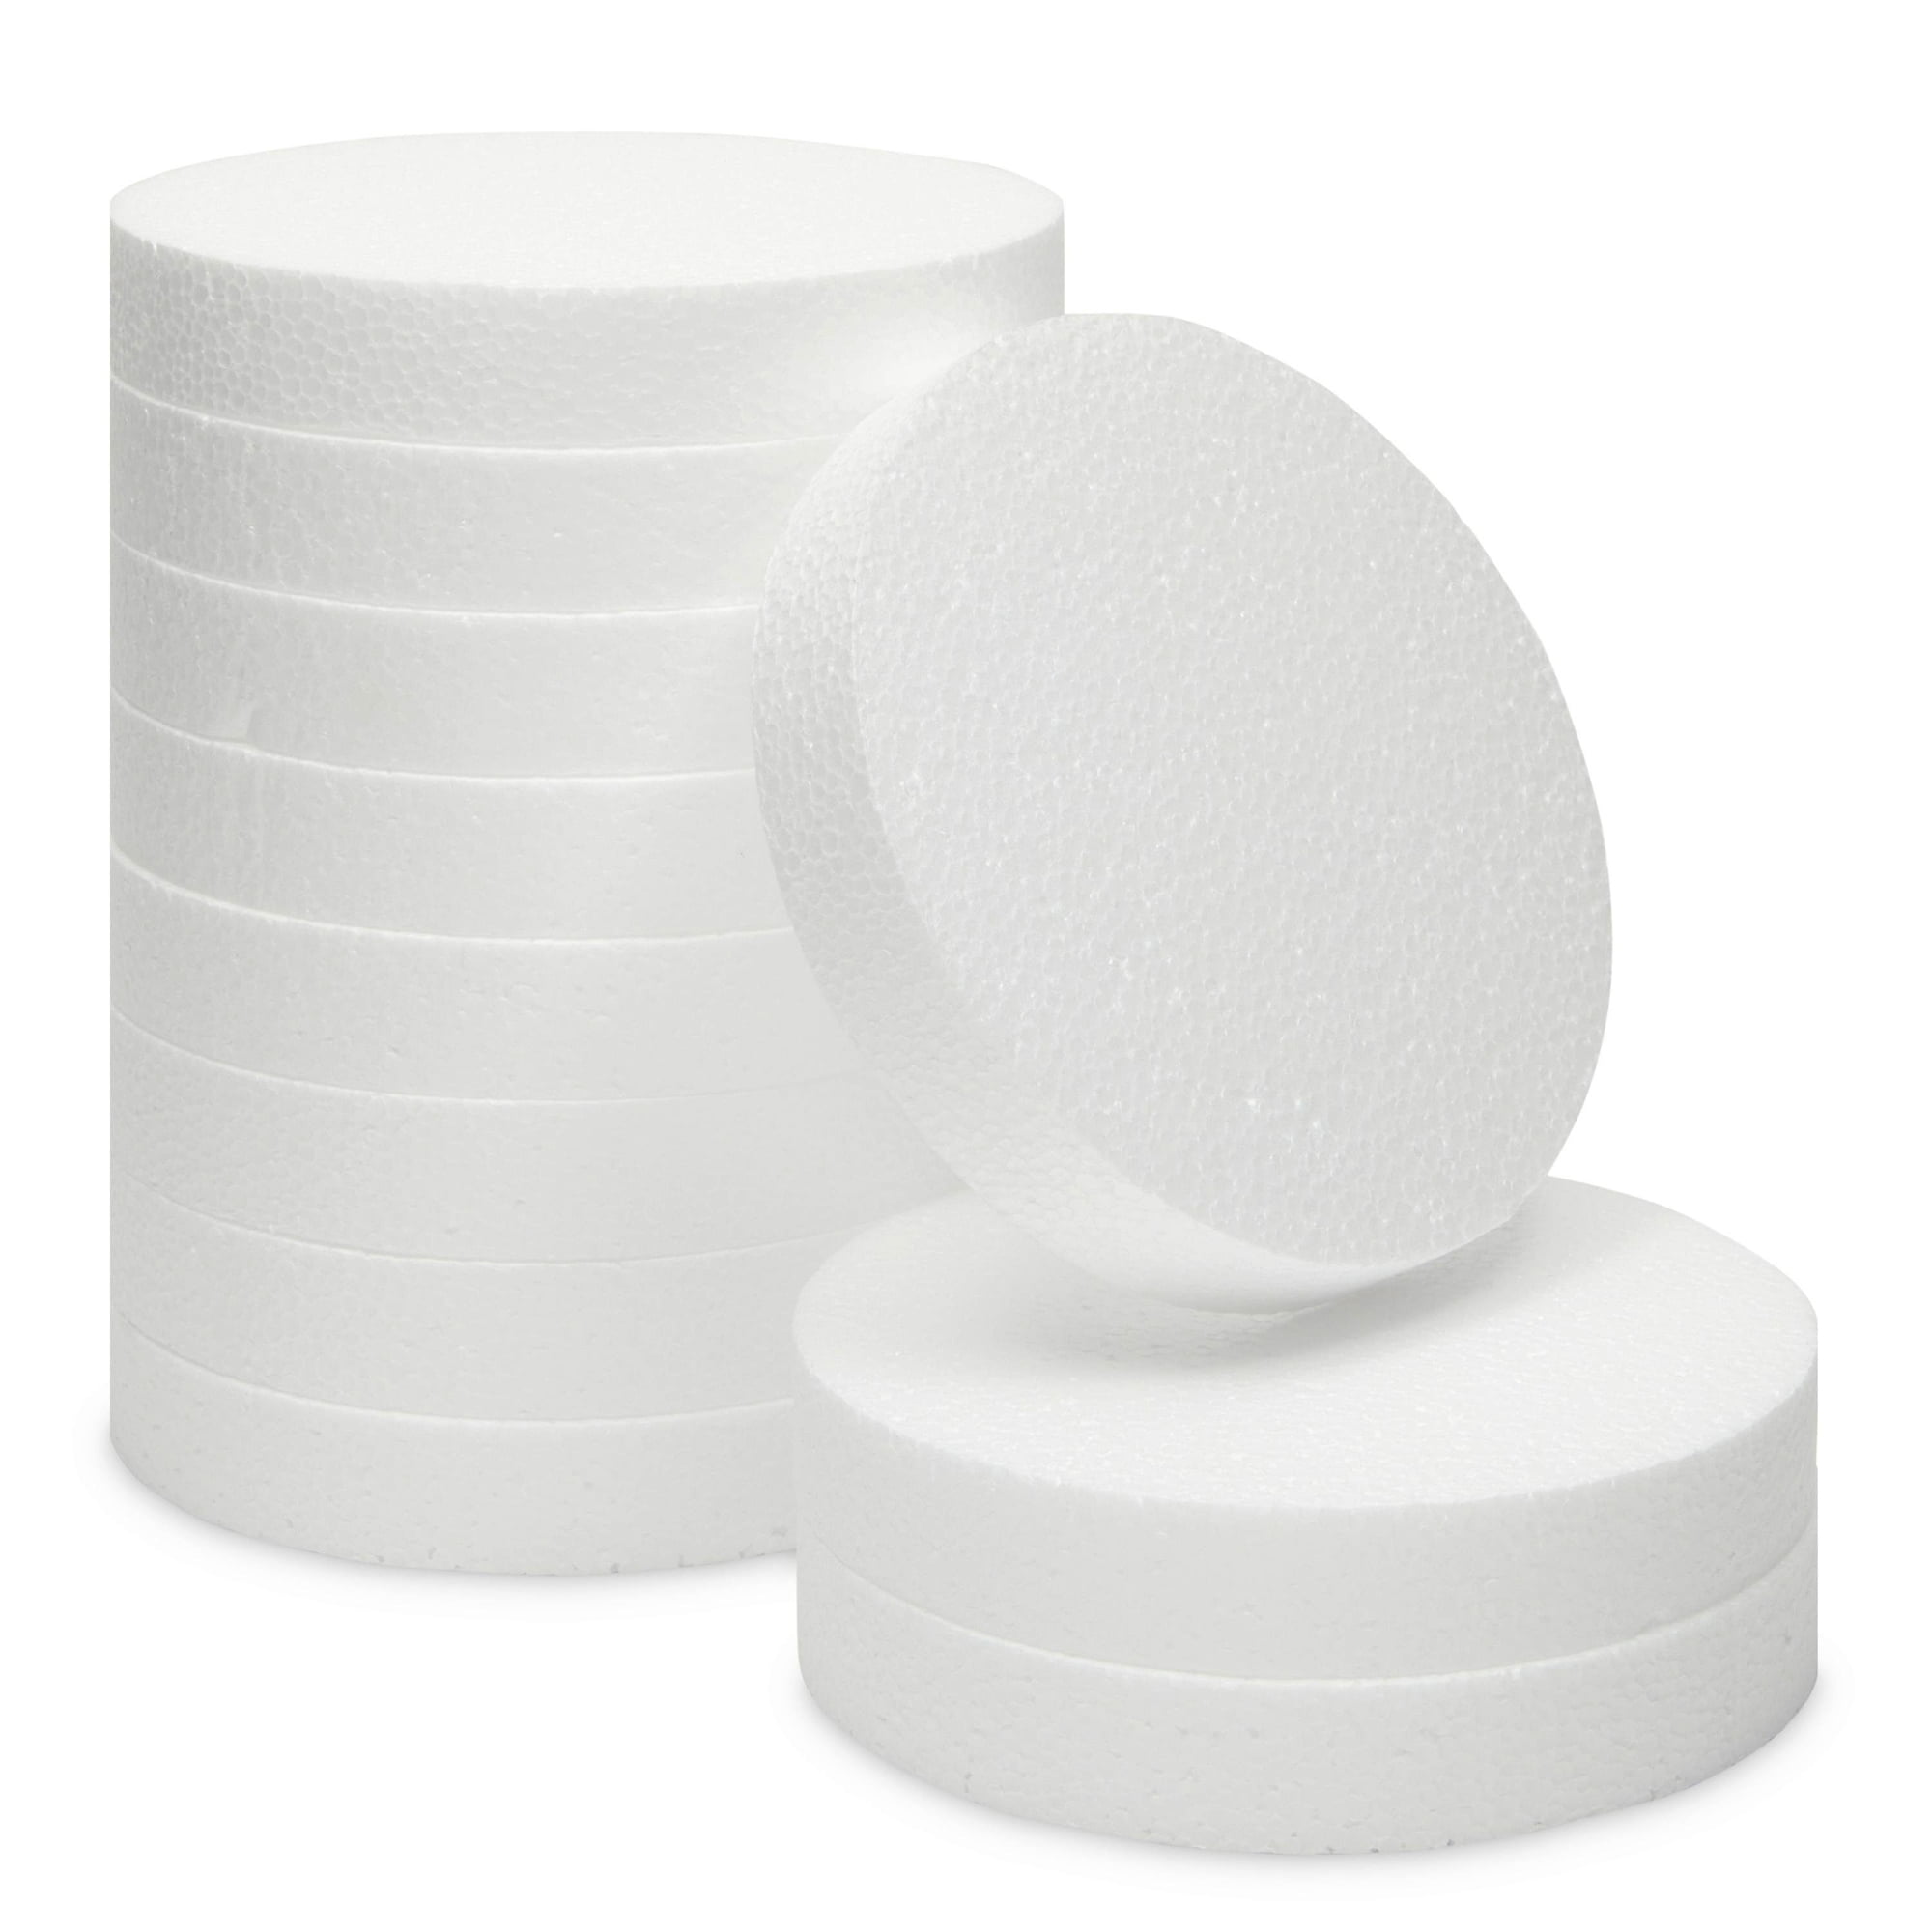 Juvale 12 Pack Foam Circles for Crafts, Round Polystyrene Discs for DIY Projects, 4 x 4 x 1 in